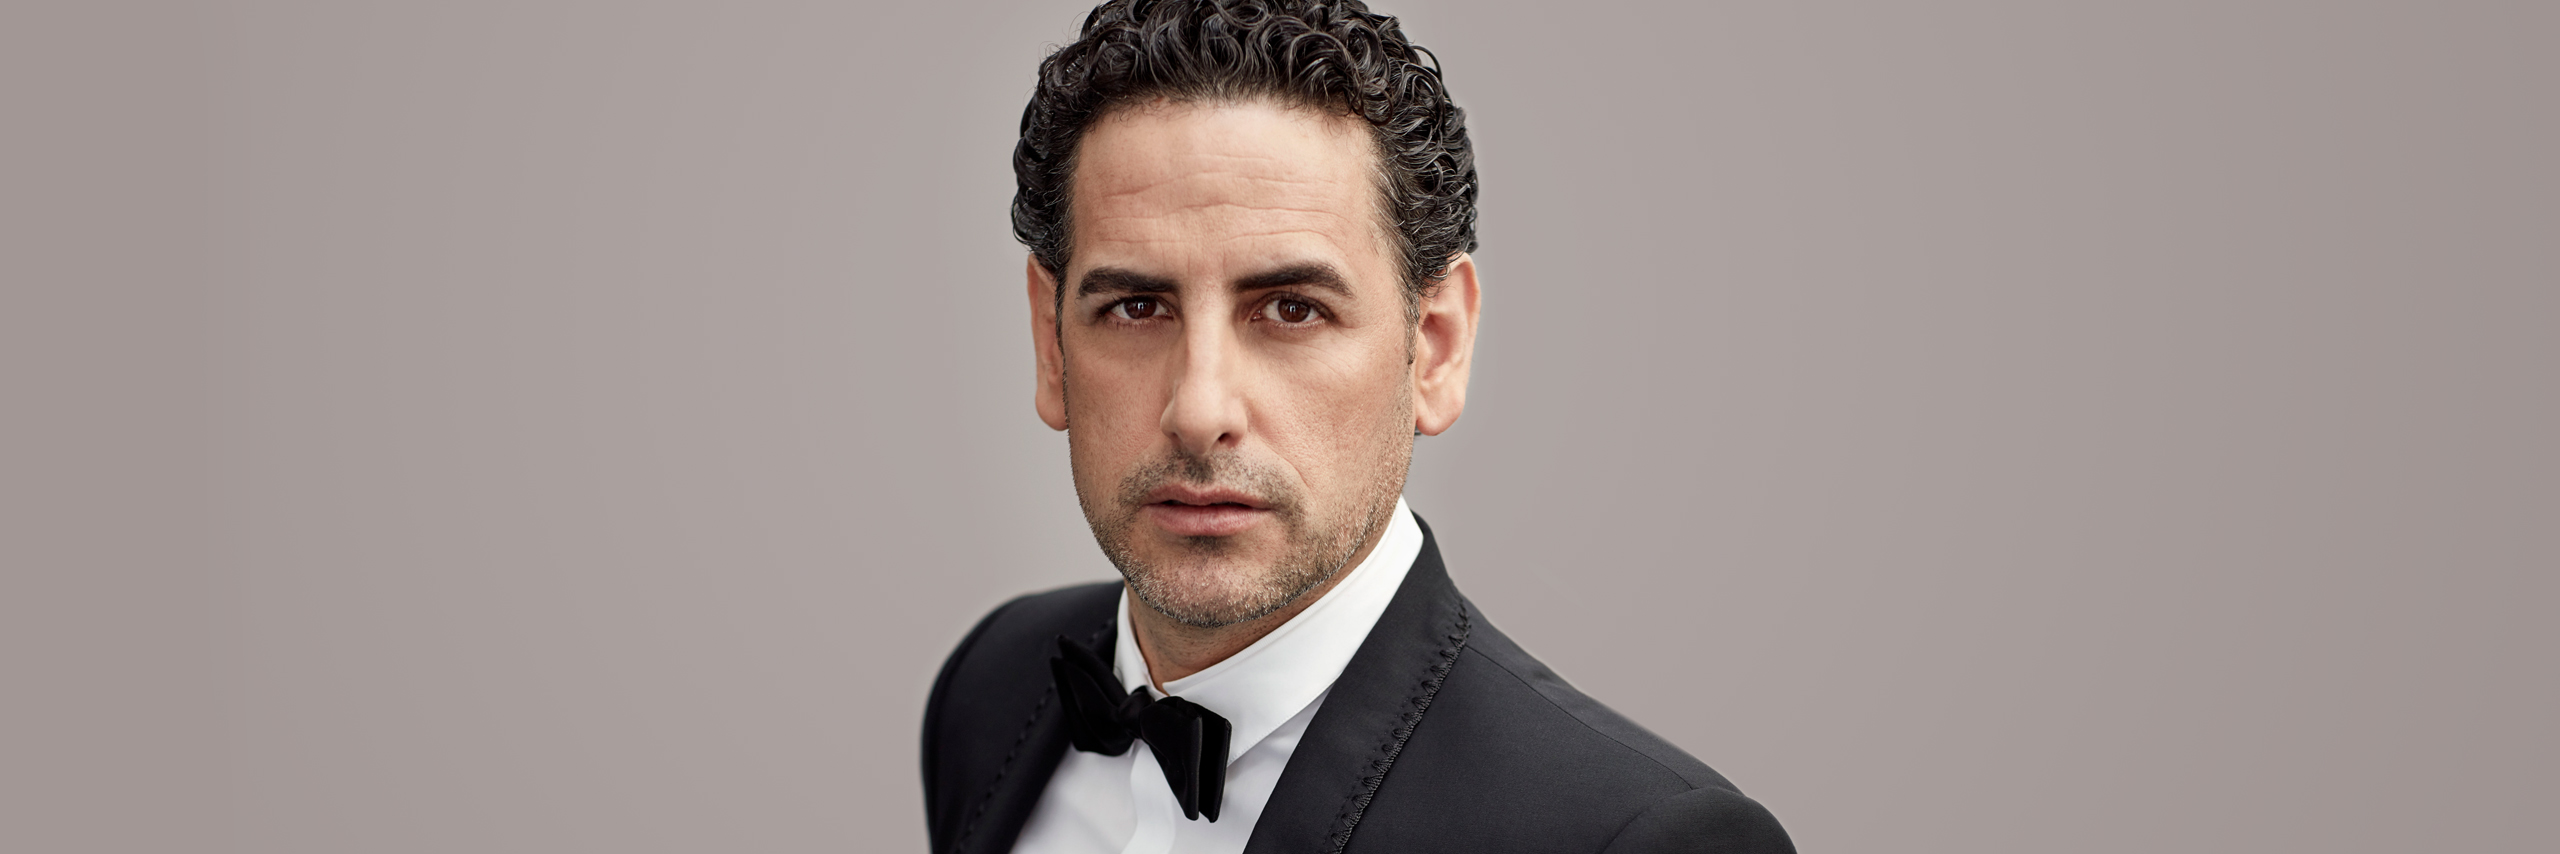 A man with dark curly hair looks at the camera wearing a tuxedo